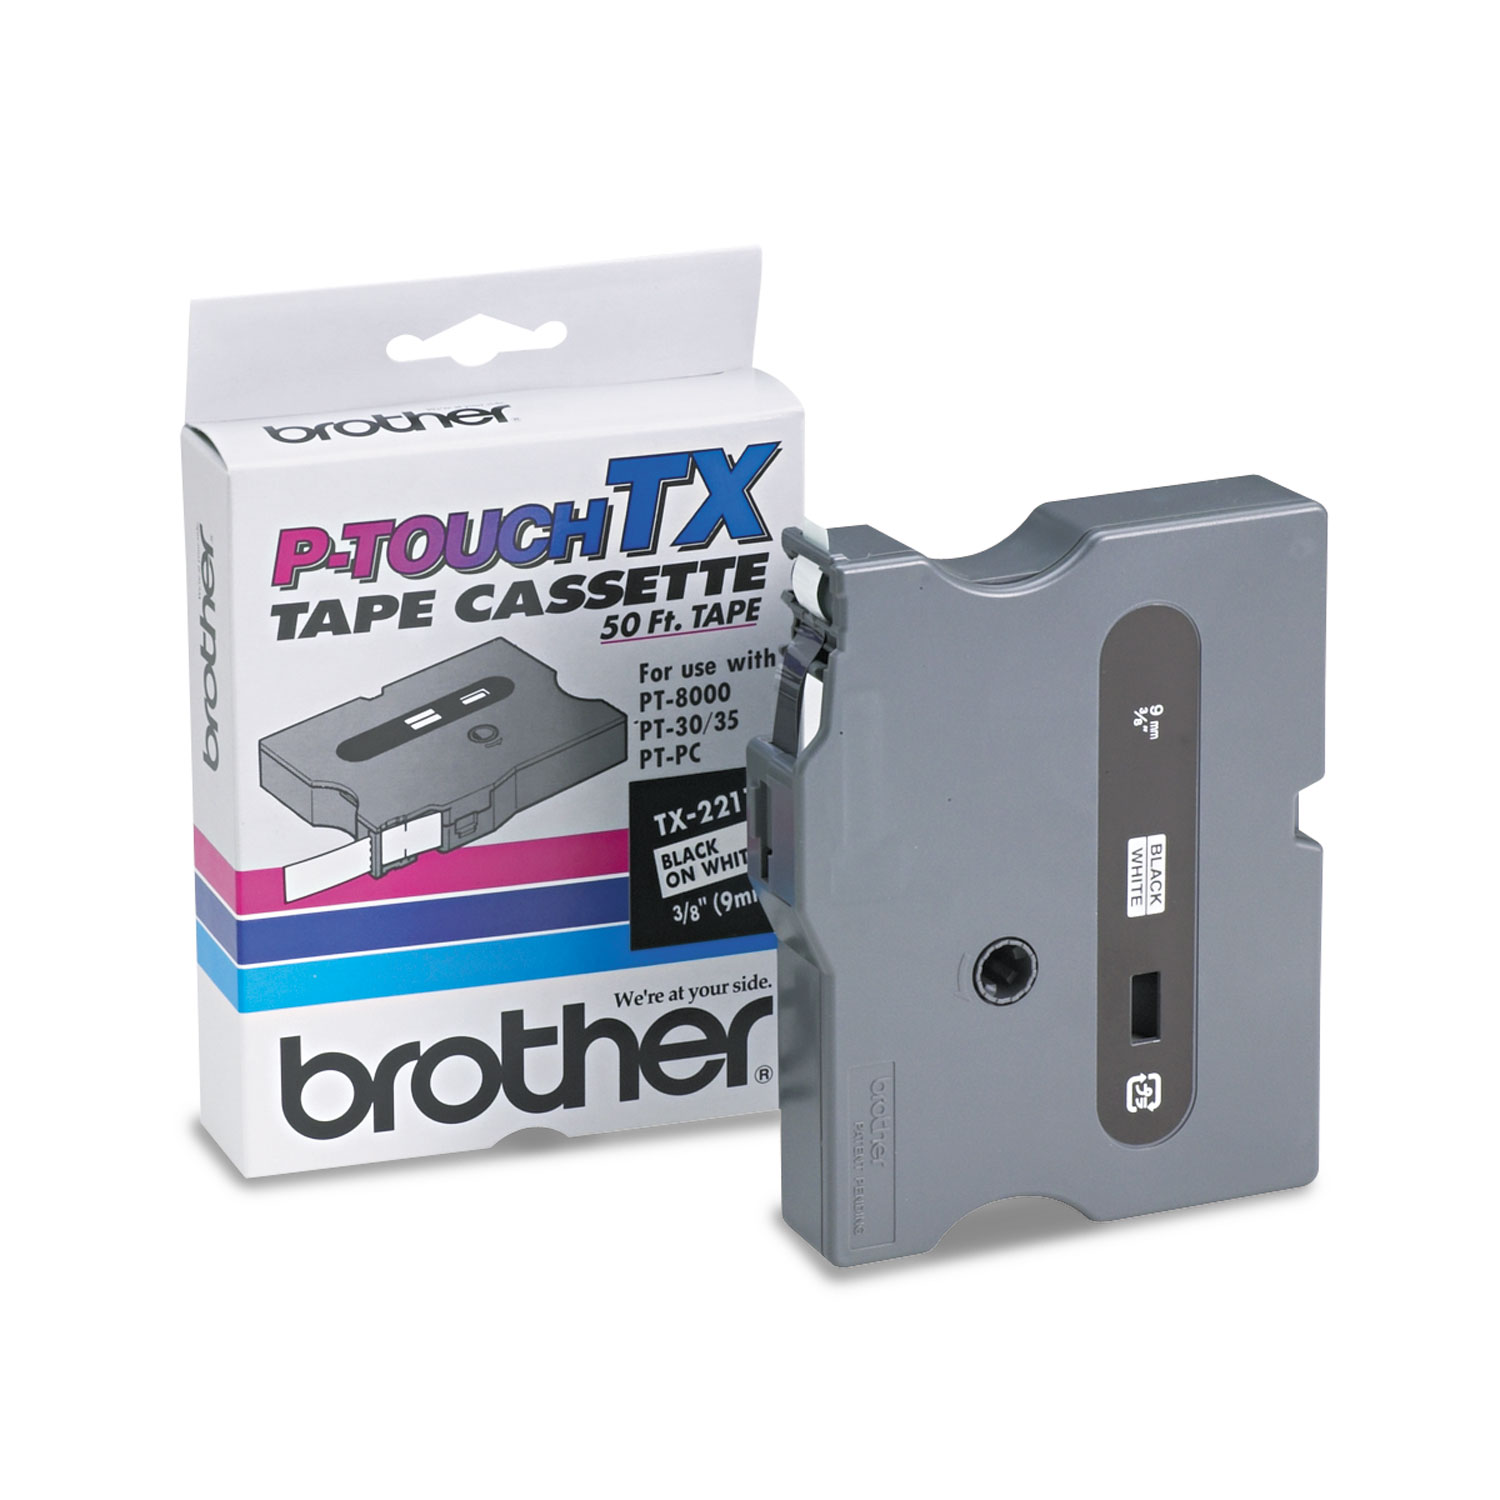  Brother P-Touch TX2211 TX Tape Cartridge for PT-8000, PT-PC, PT-30/35, 0.35 x 50 ft, Black on White (BRTTX2211) 